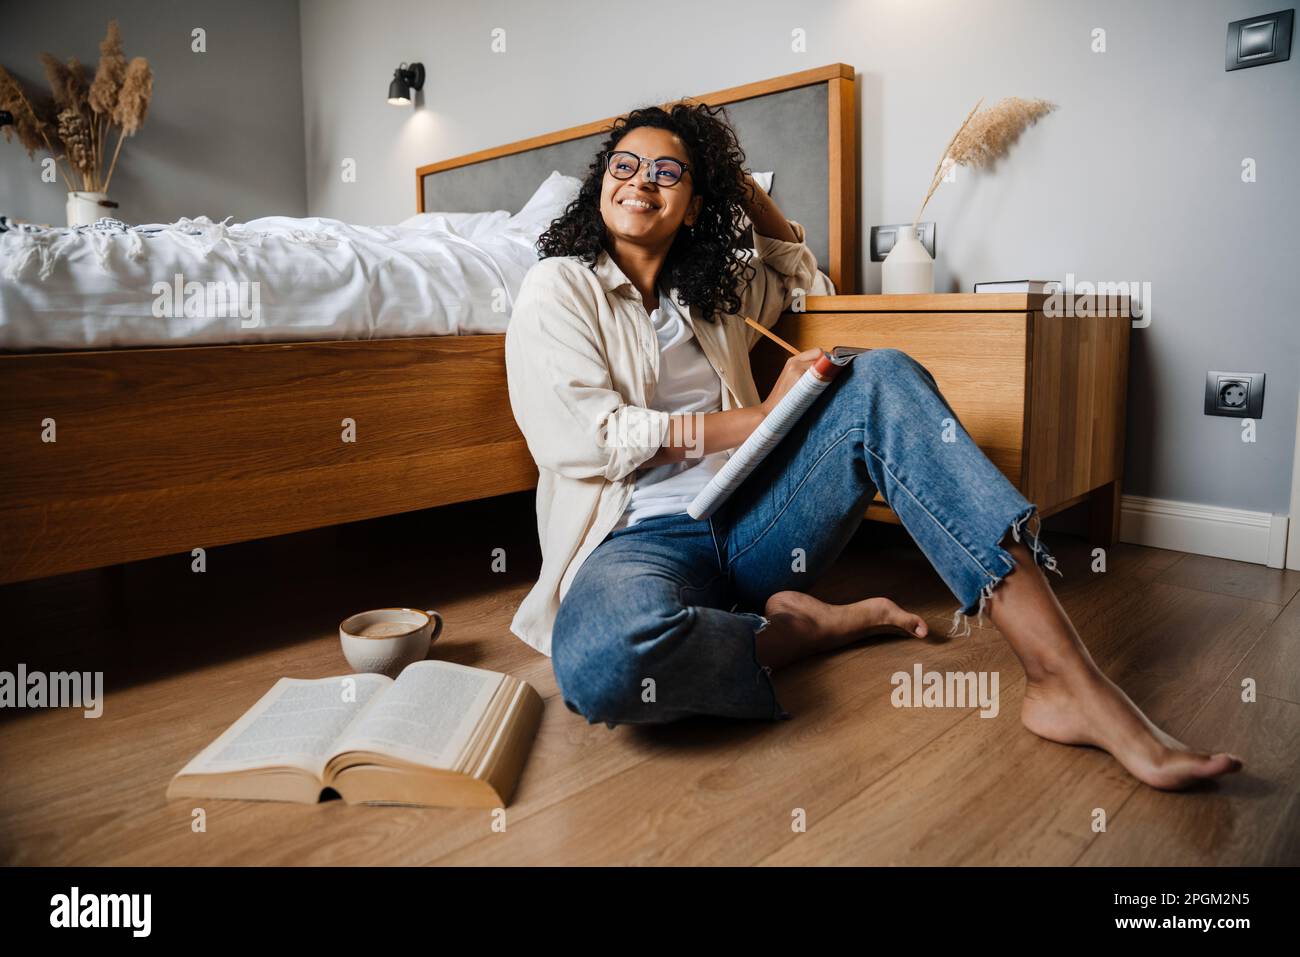 African american young woman sitting on floor at home and studying with exercise book Stock Photo